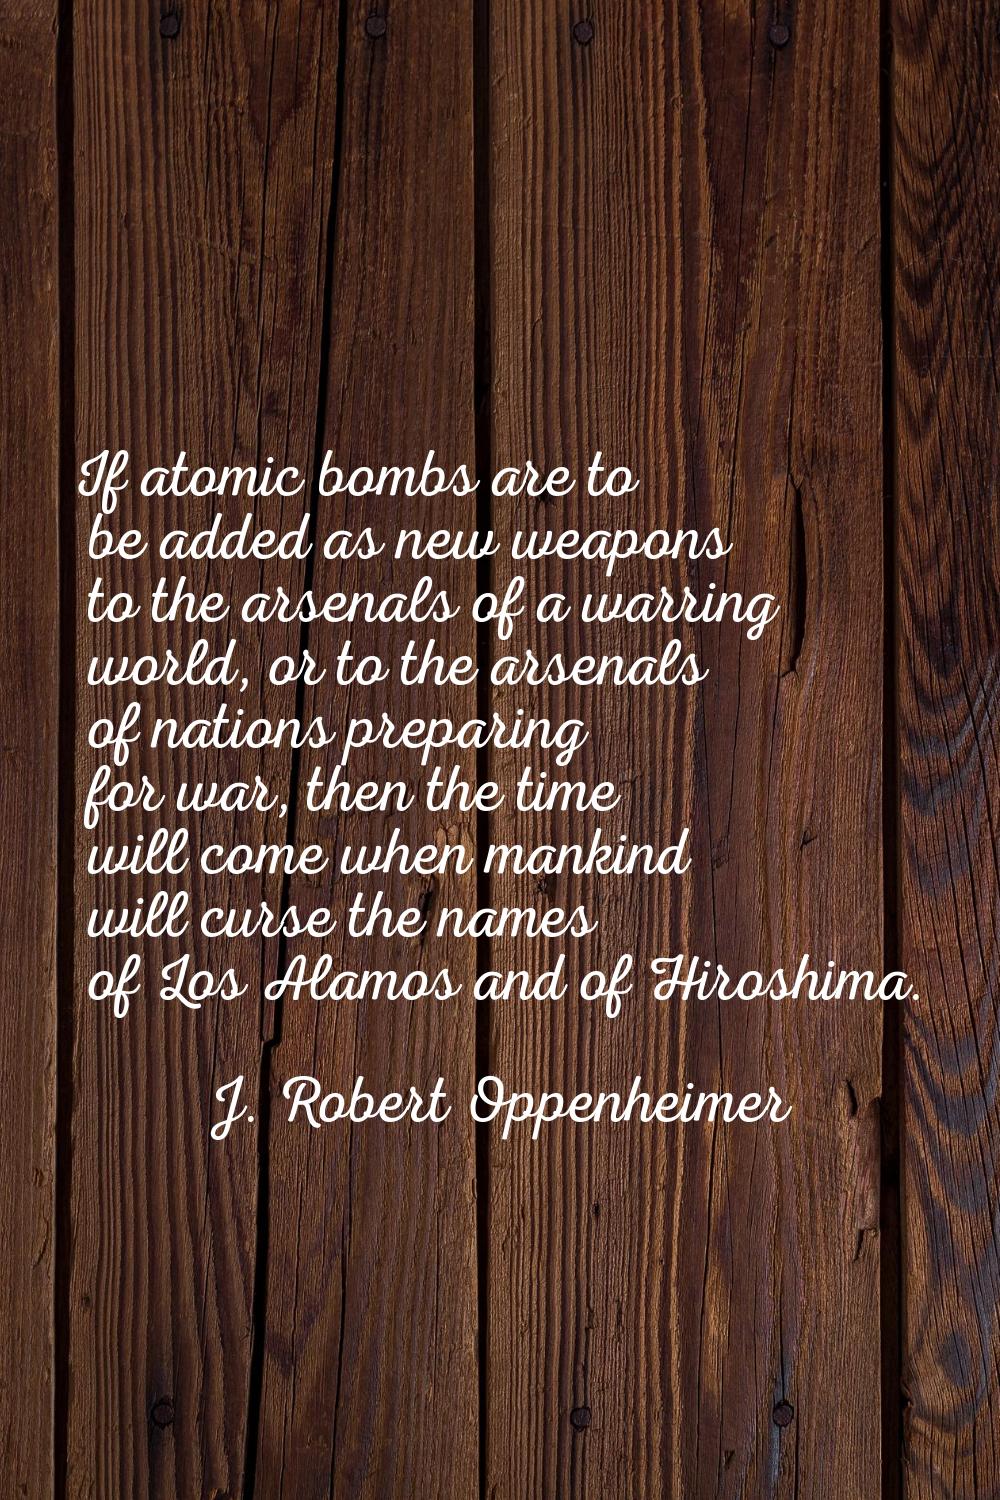 If atomic bombs are to be added as new weapons to the arsenals of a warring world, or to the arsena